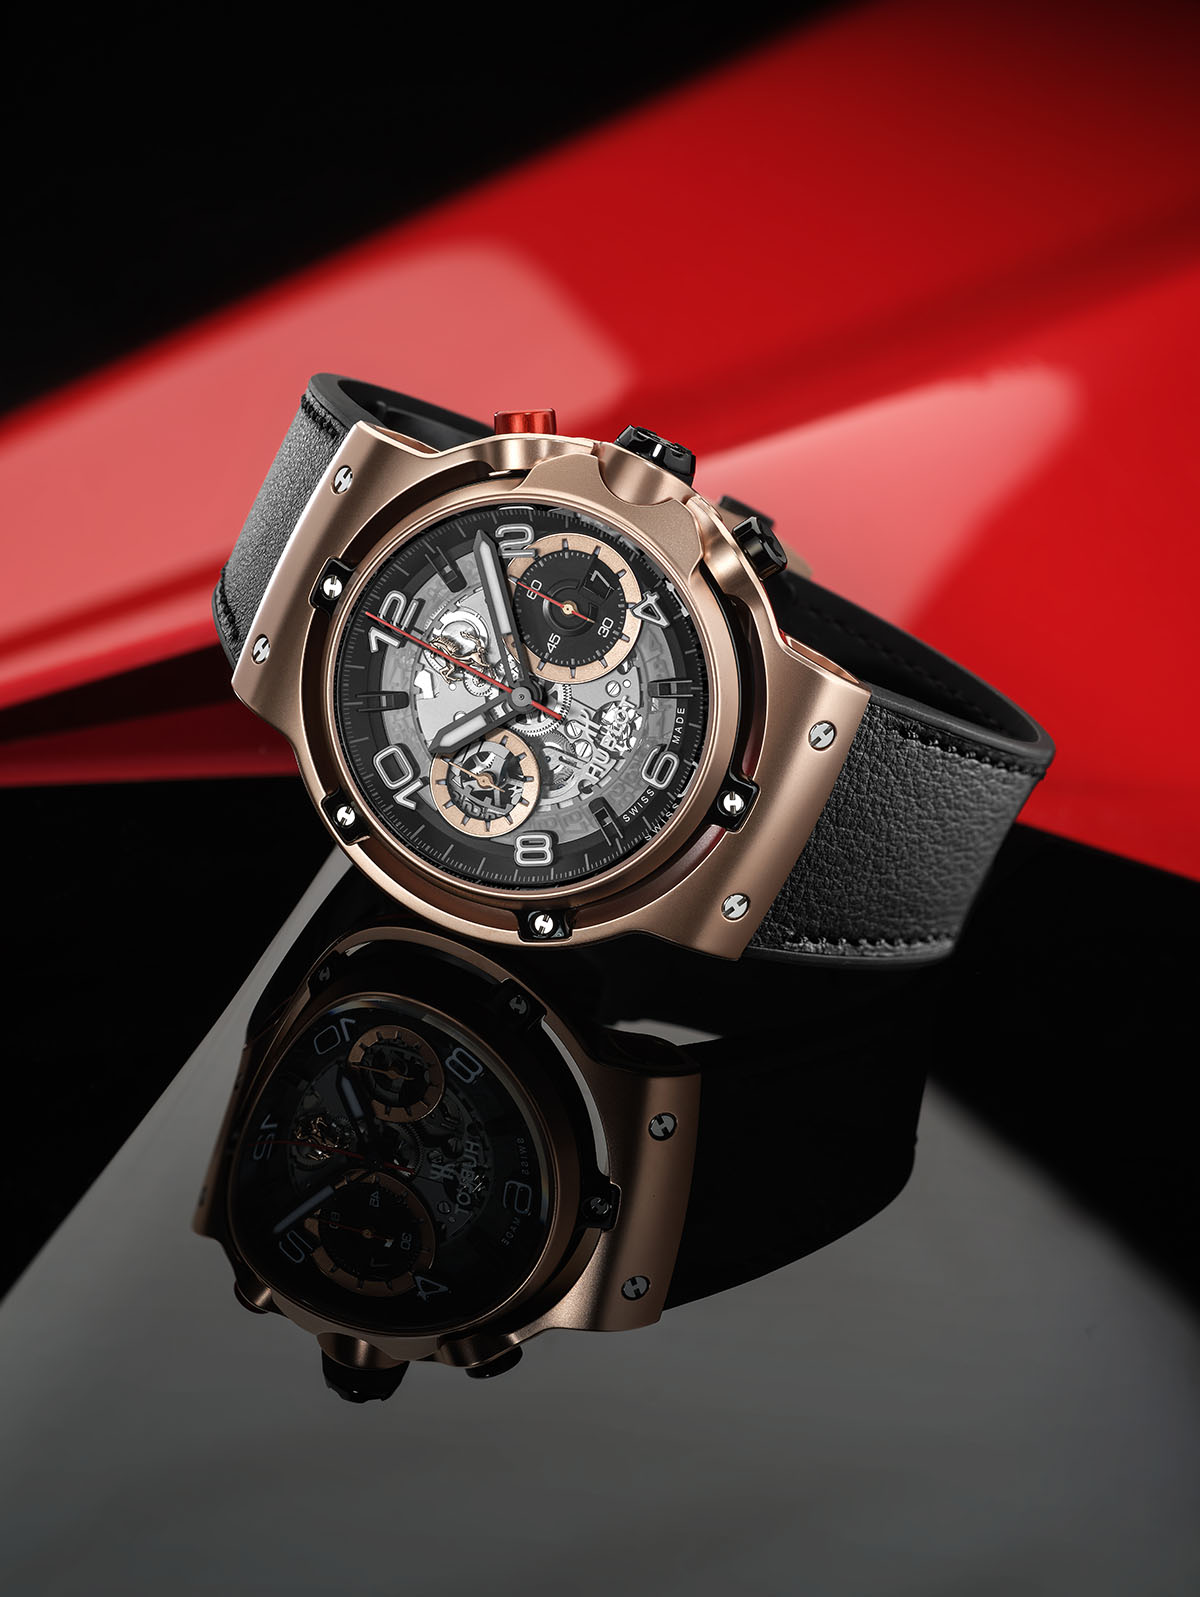 Luxury watch product image in black and gold